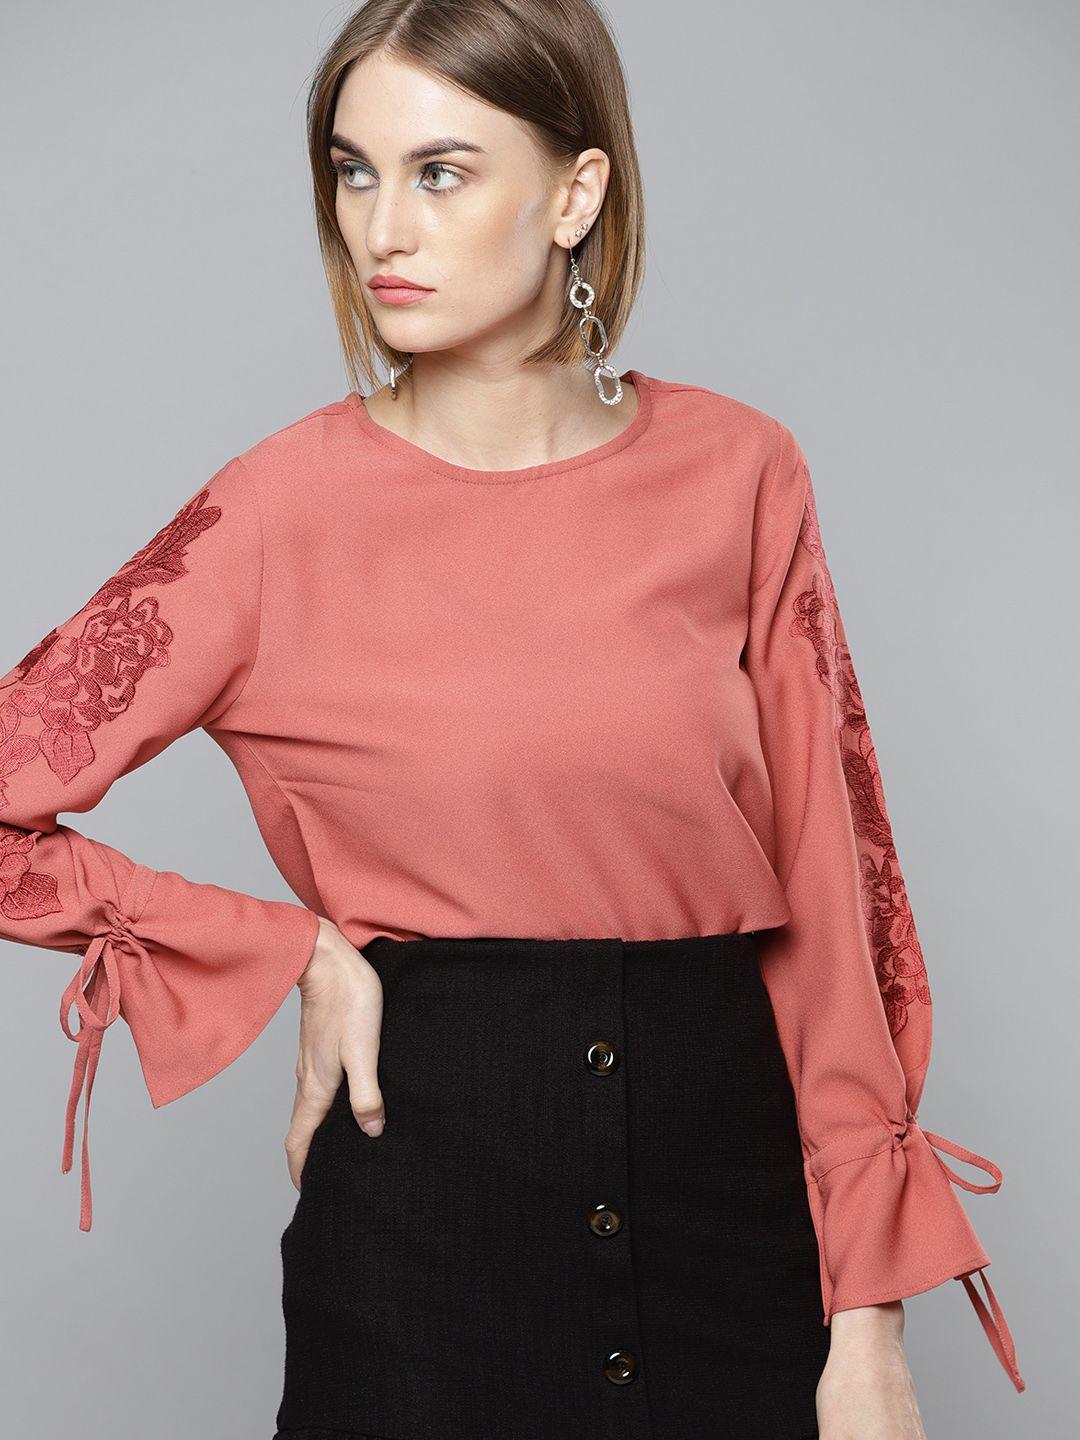 marie claire women peach-coloured solid top